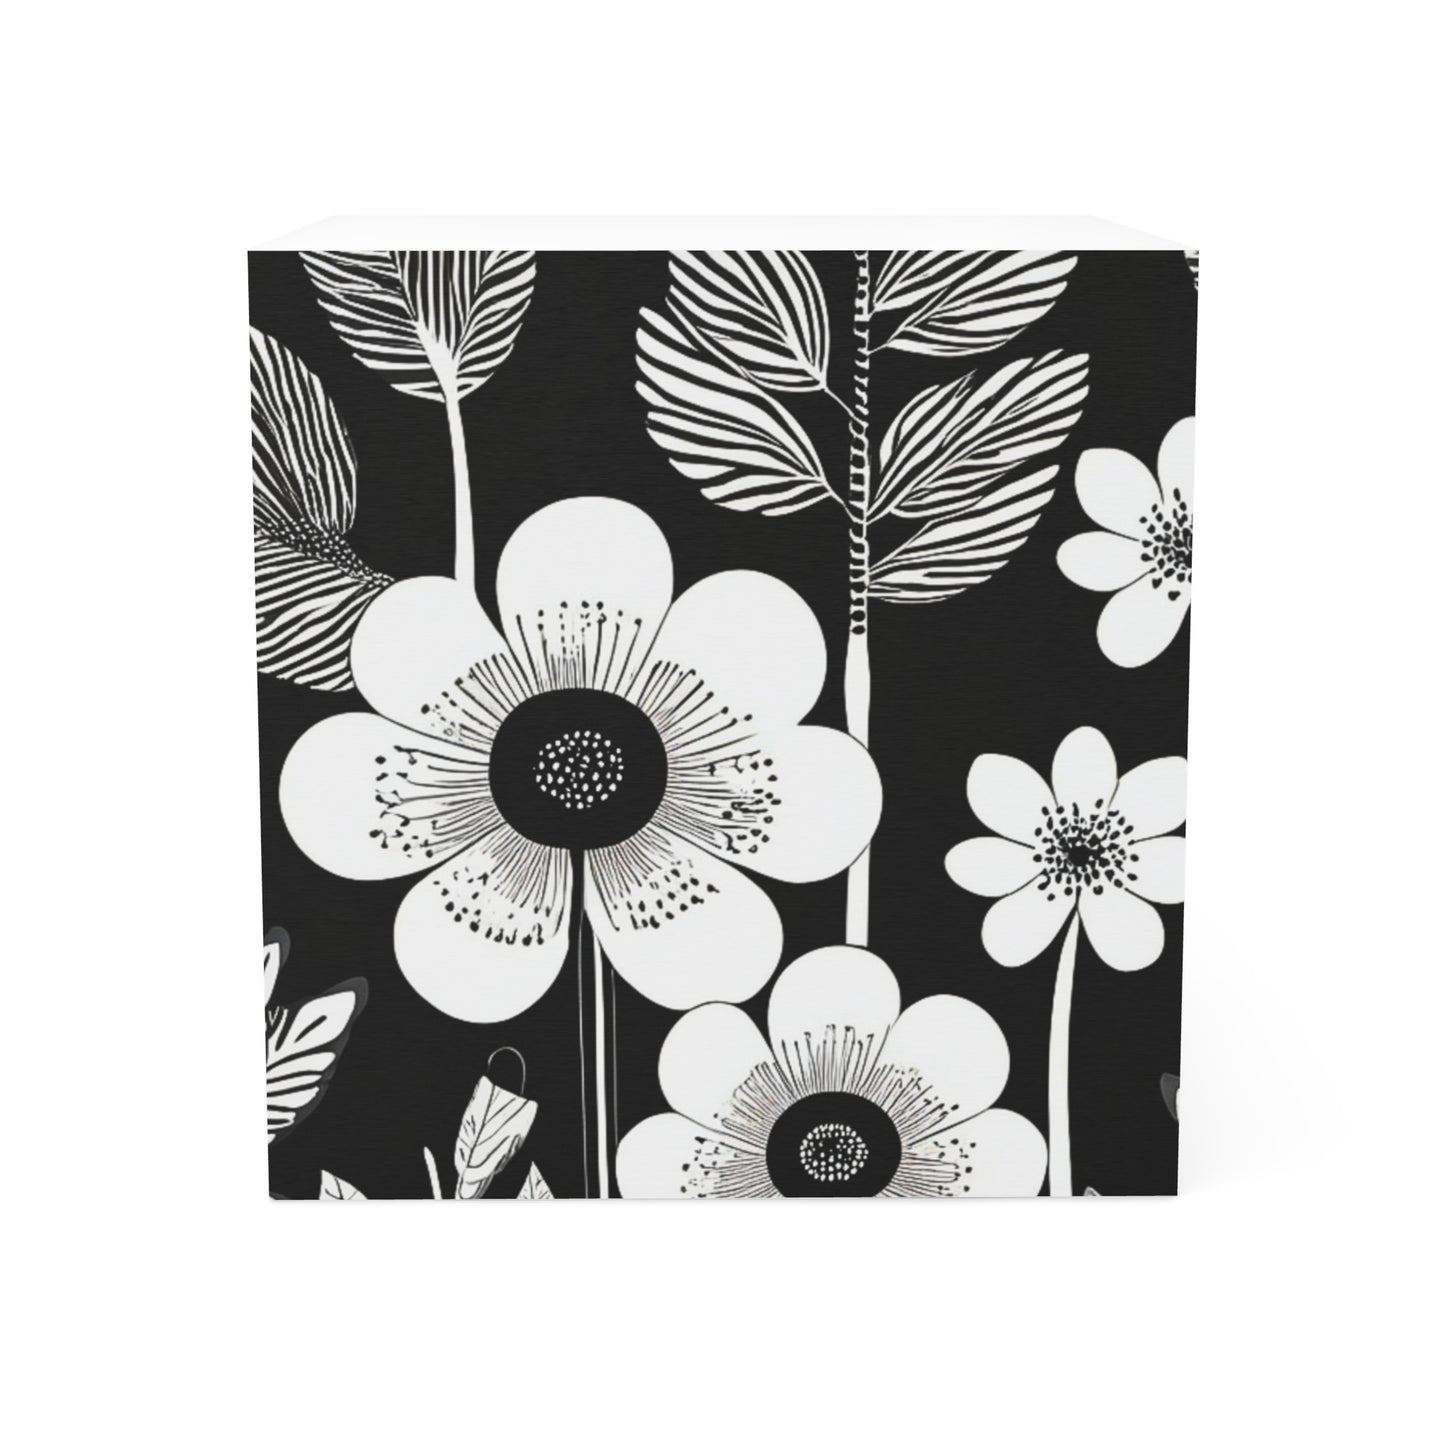 Black and White Poppies Mod 1960s Pop Art Decorative Paper Note Cube